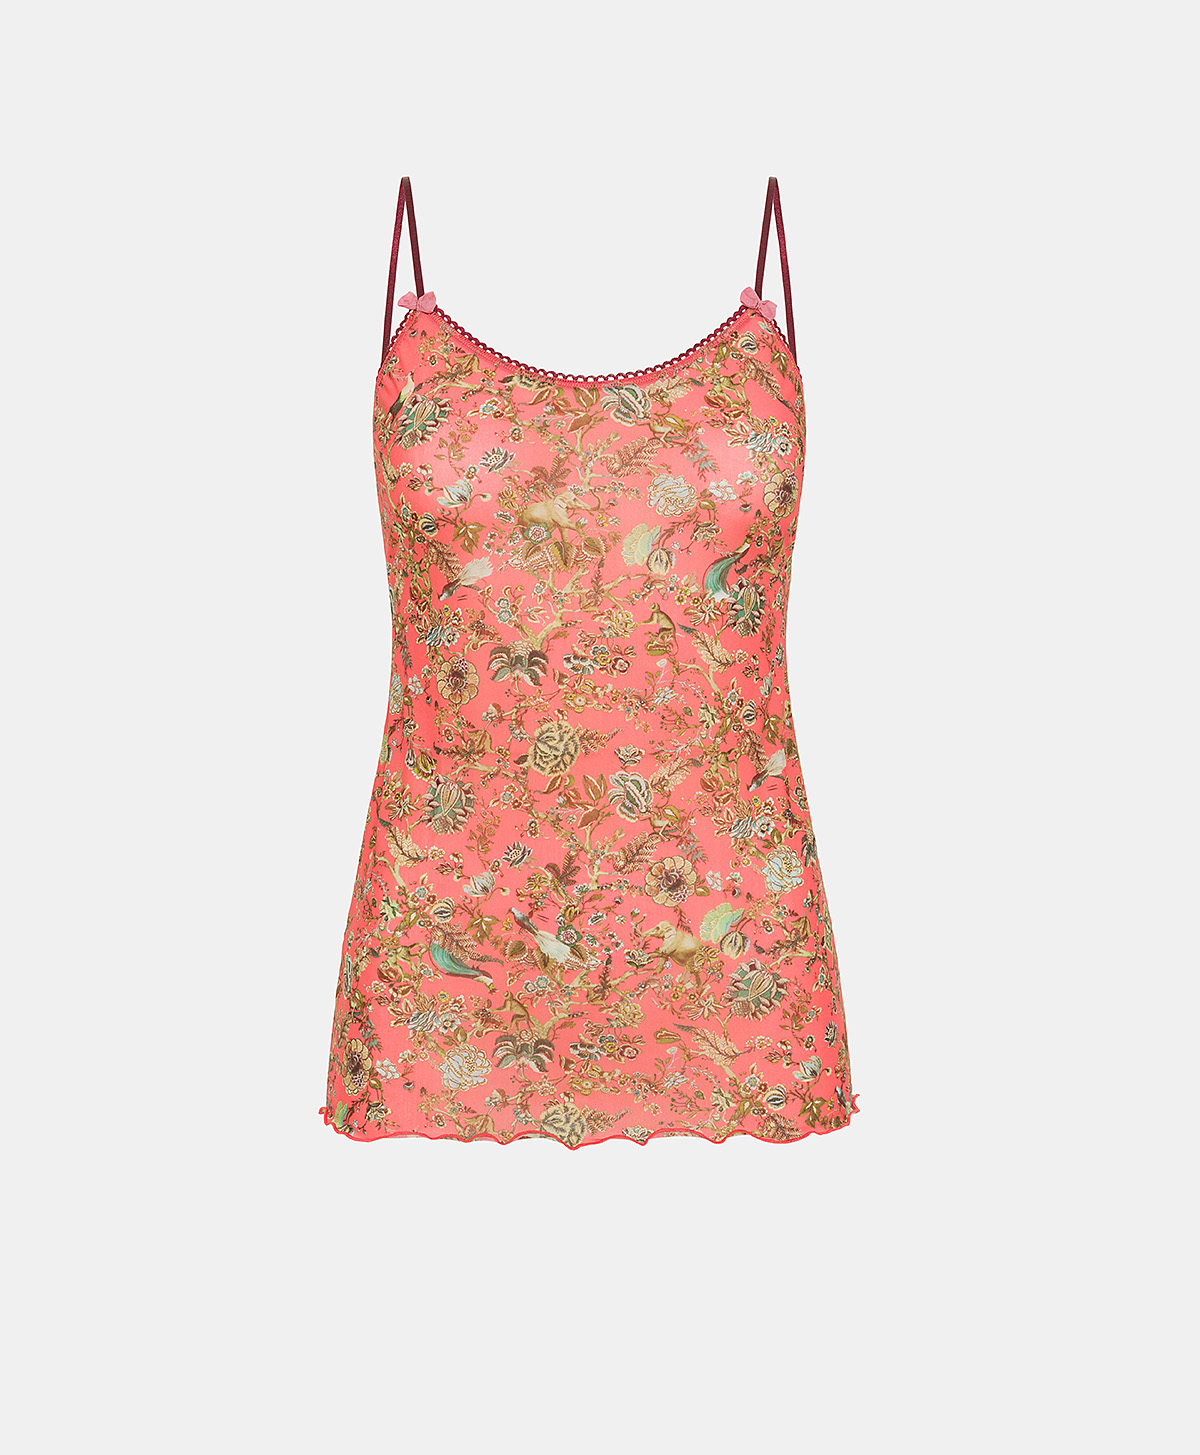 AIRELLE TOP IN PRINTED NYLON - PINK/CAMEL - Momonì